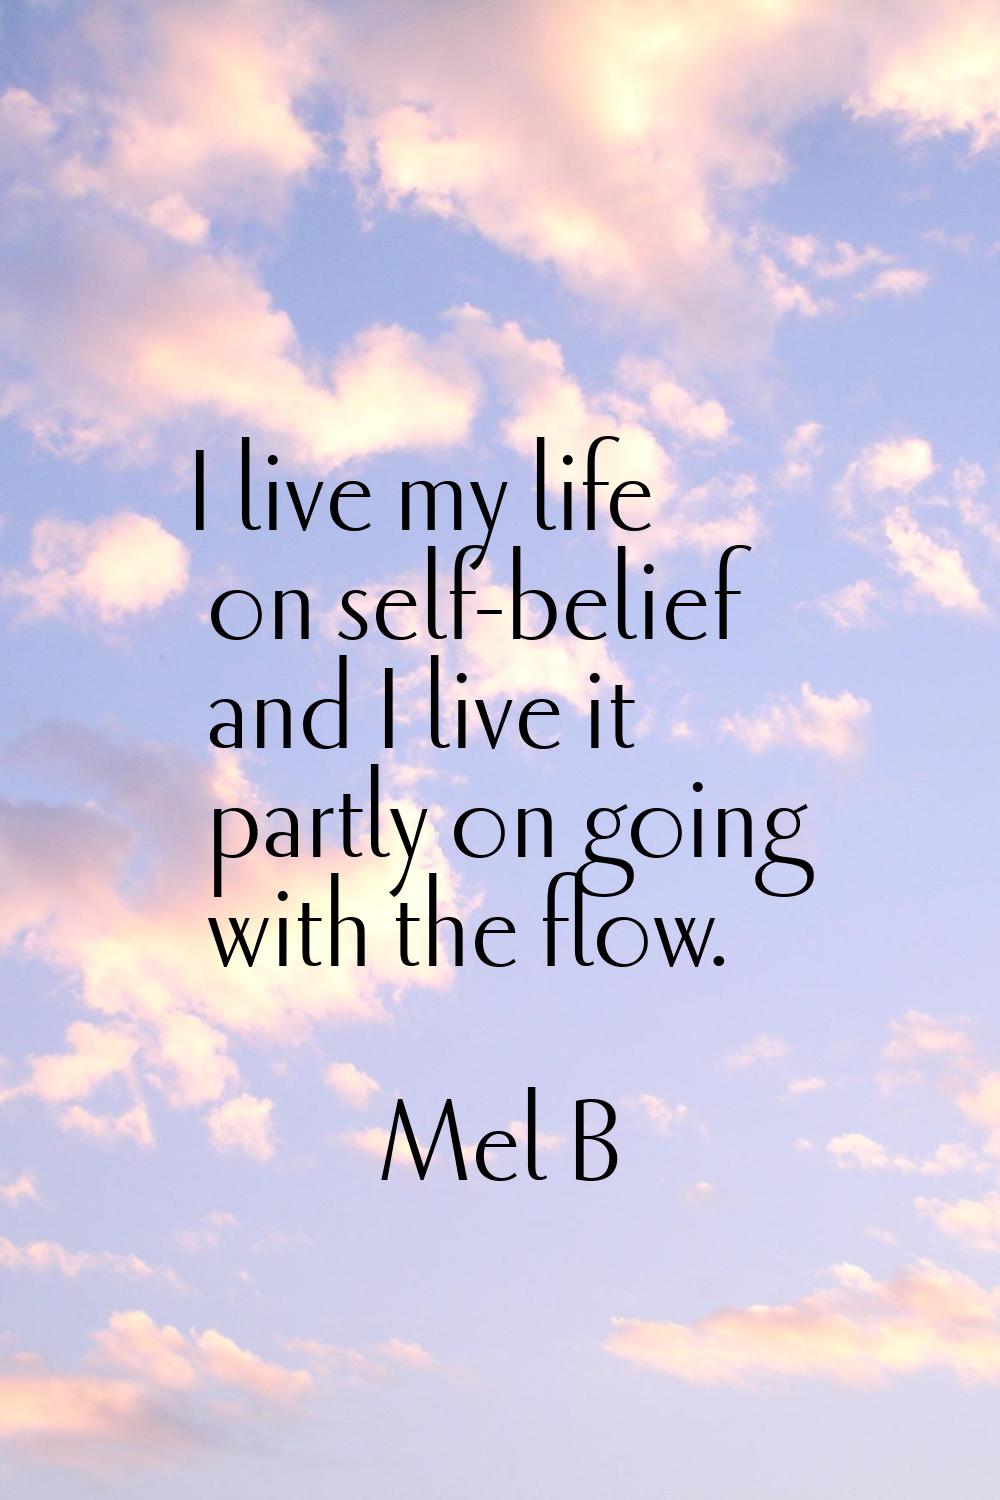 I live my life on self-belief and I live it partly on going with the flow.